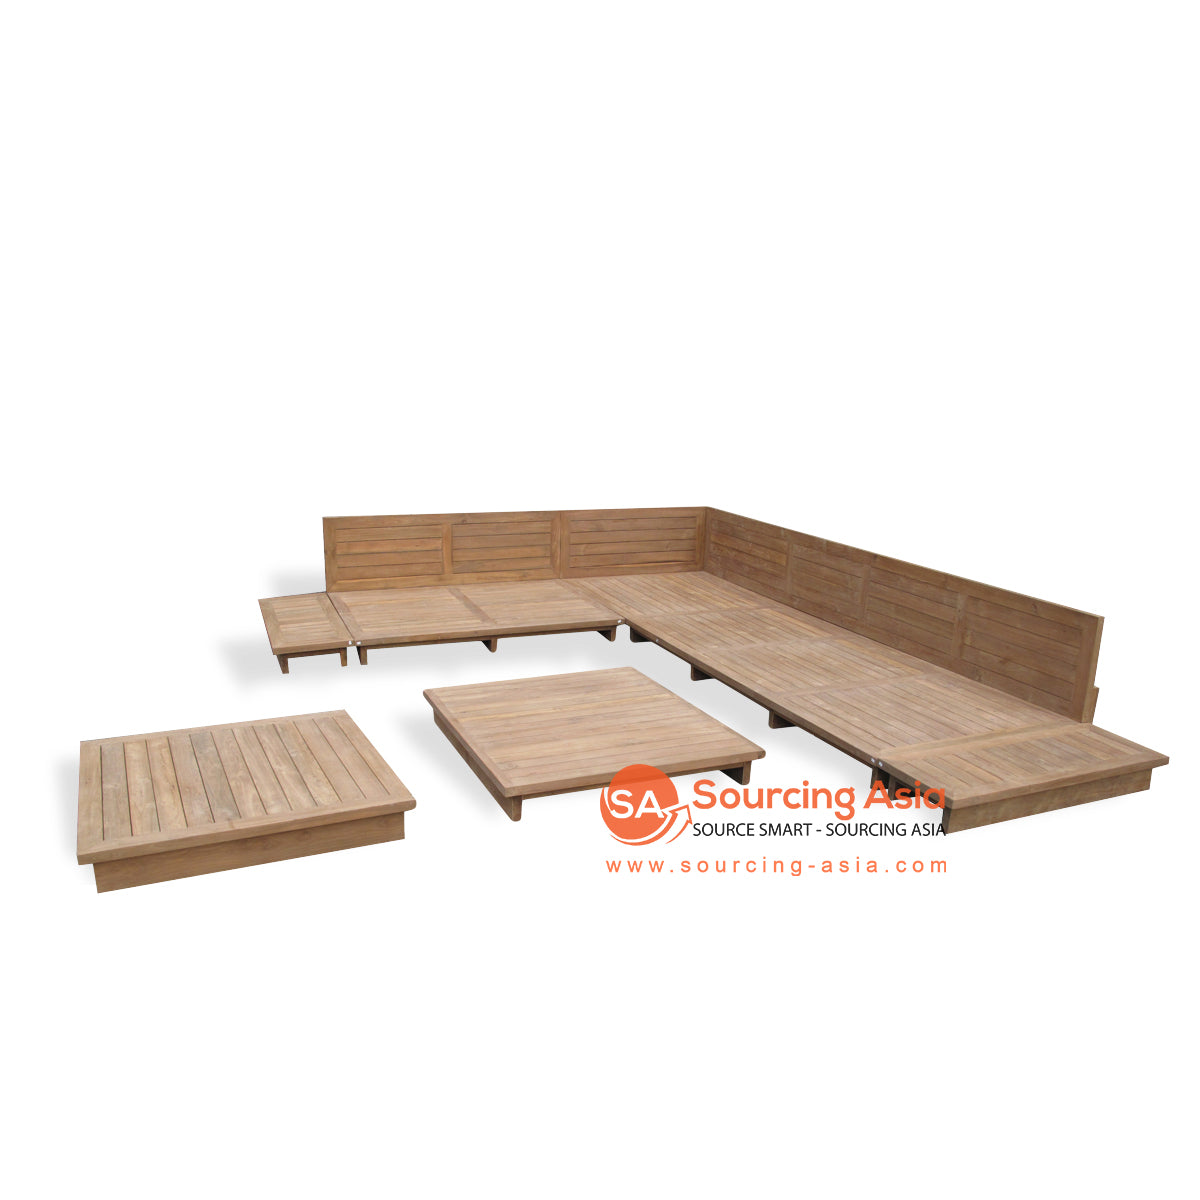 ECL039 NATURAL RECYCLED TEAK WOOD MALDIVES SOFA SET (PRICE WITHOUT CUSHION)